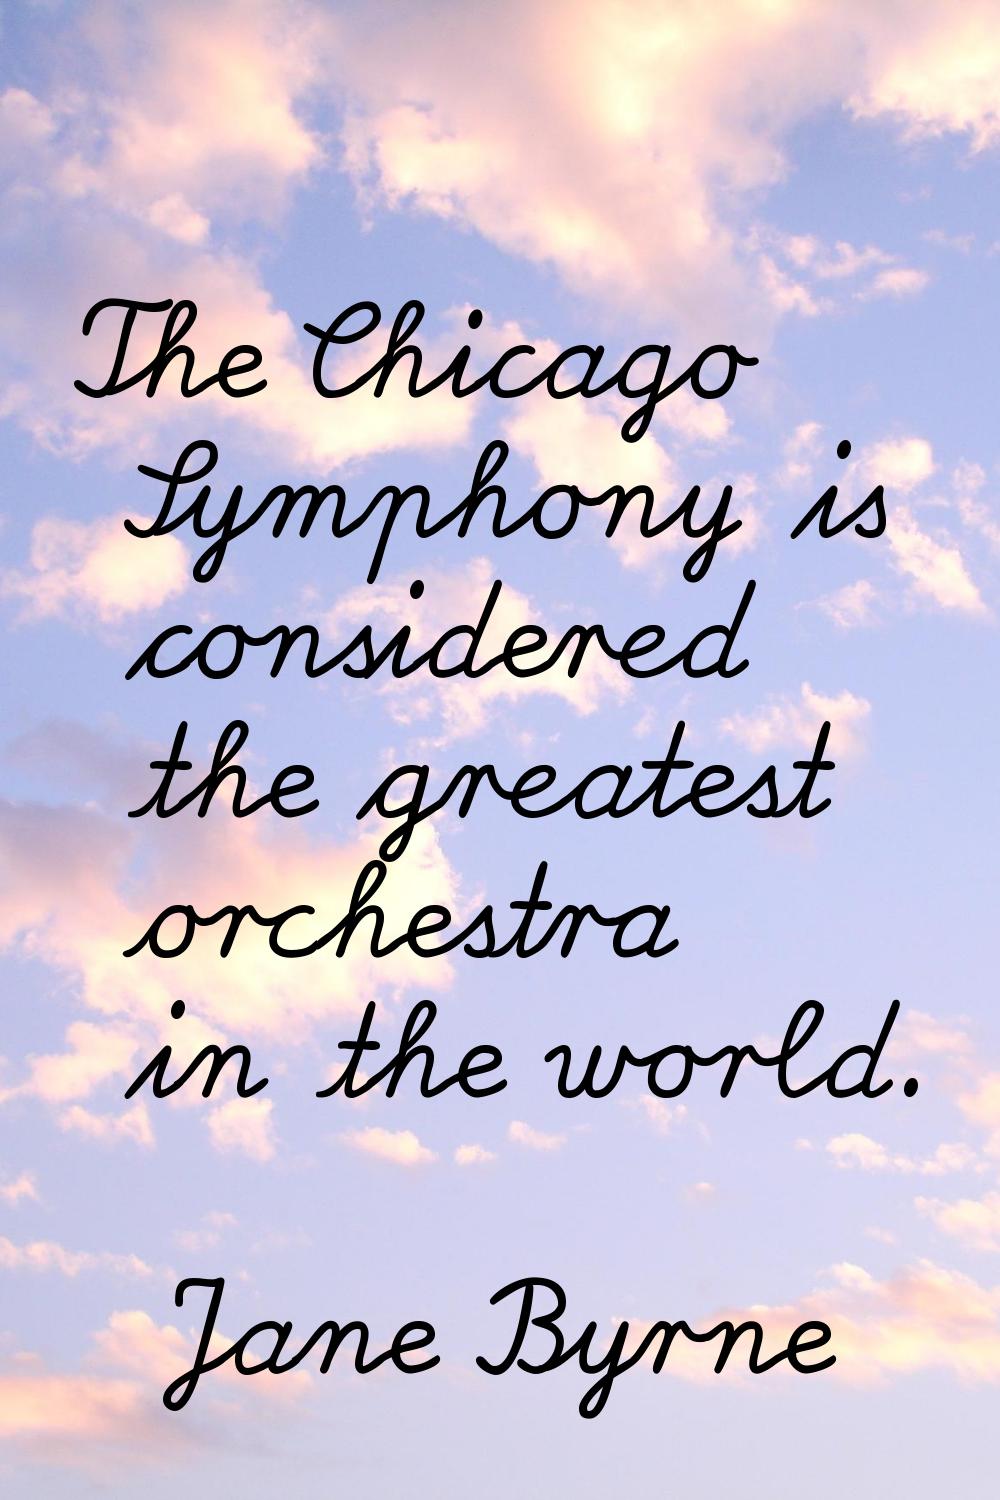 The Chicago Symphony is considered the greatest orchestra in the world.